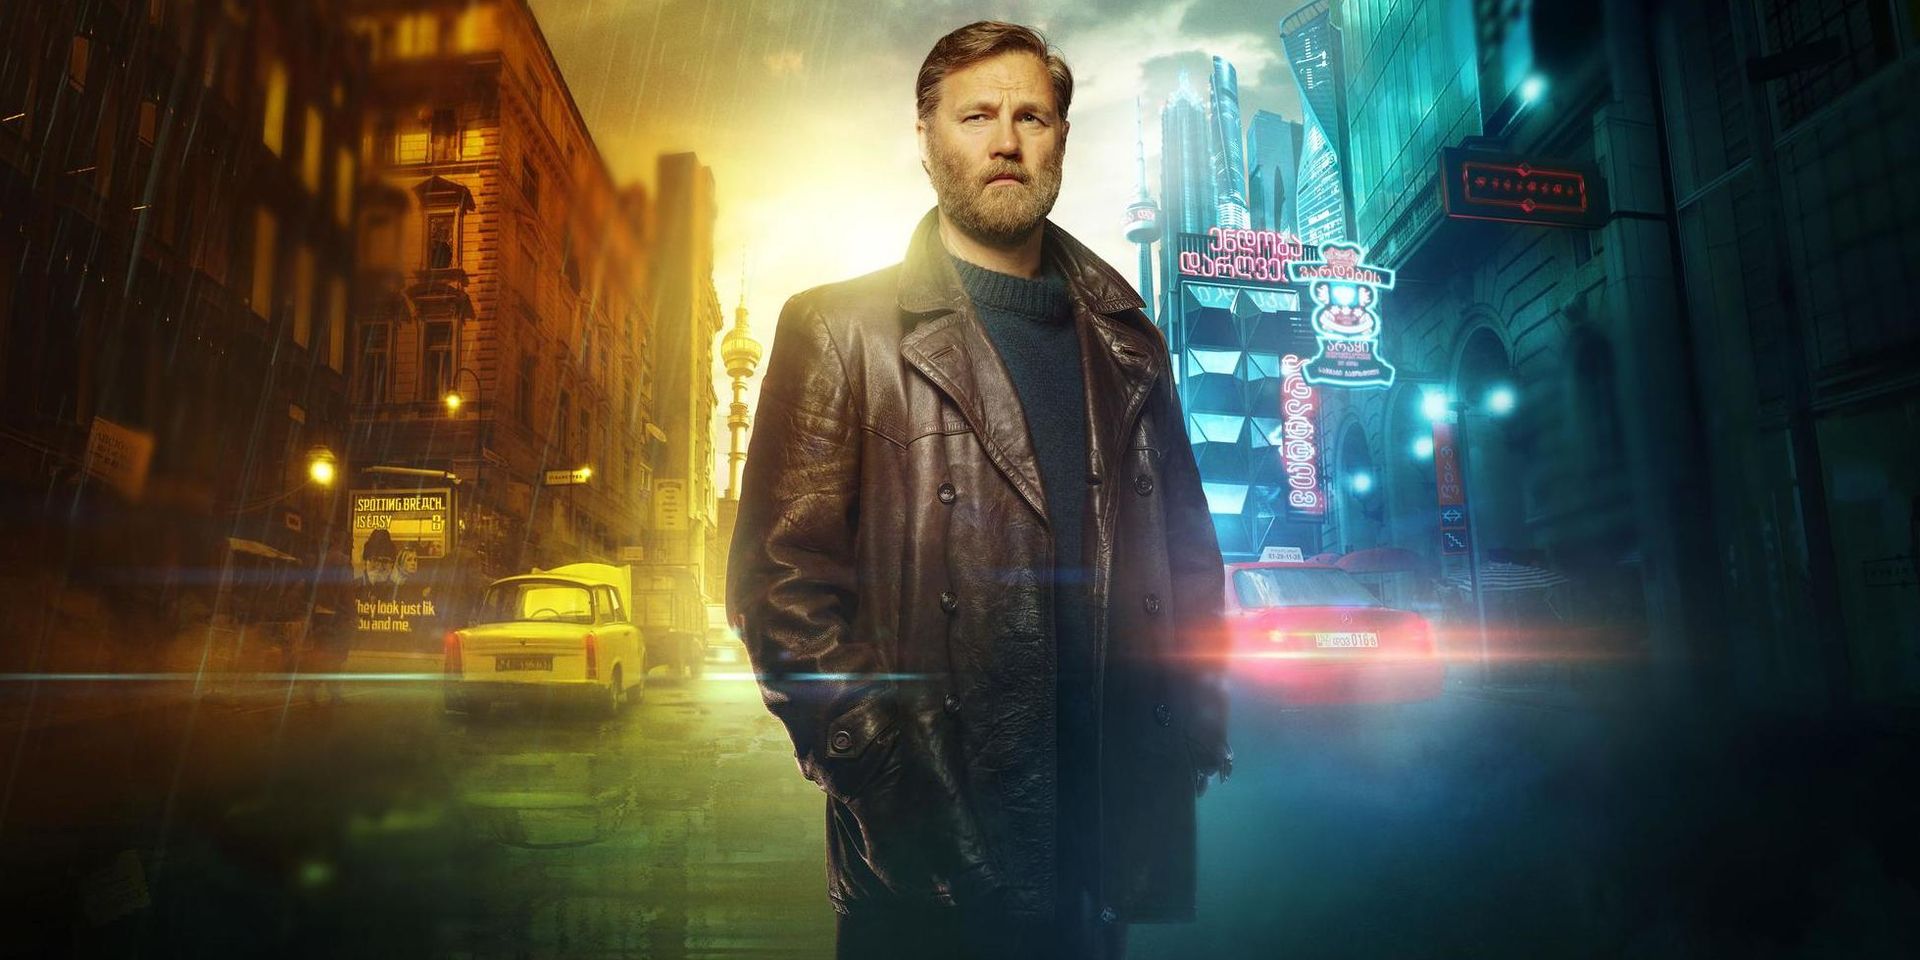 City and the City David Morrissey